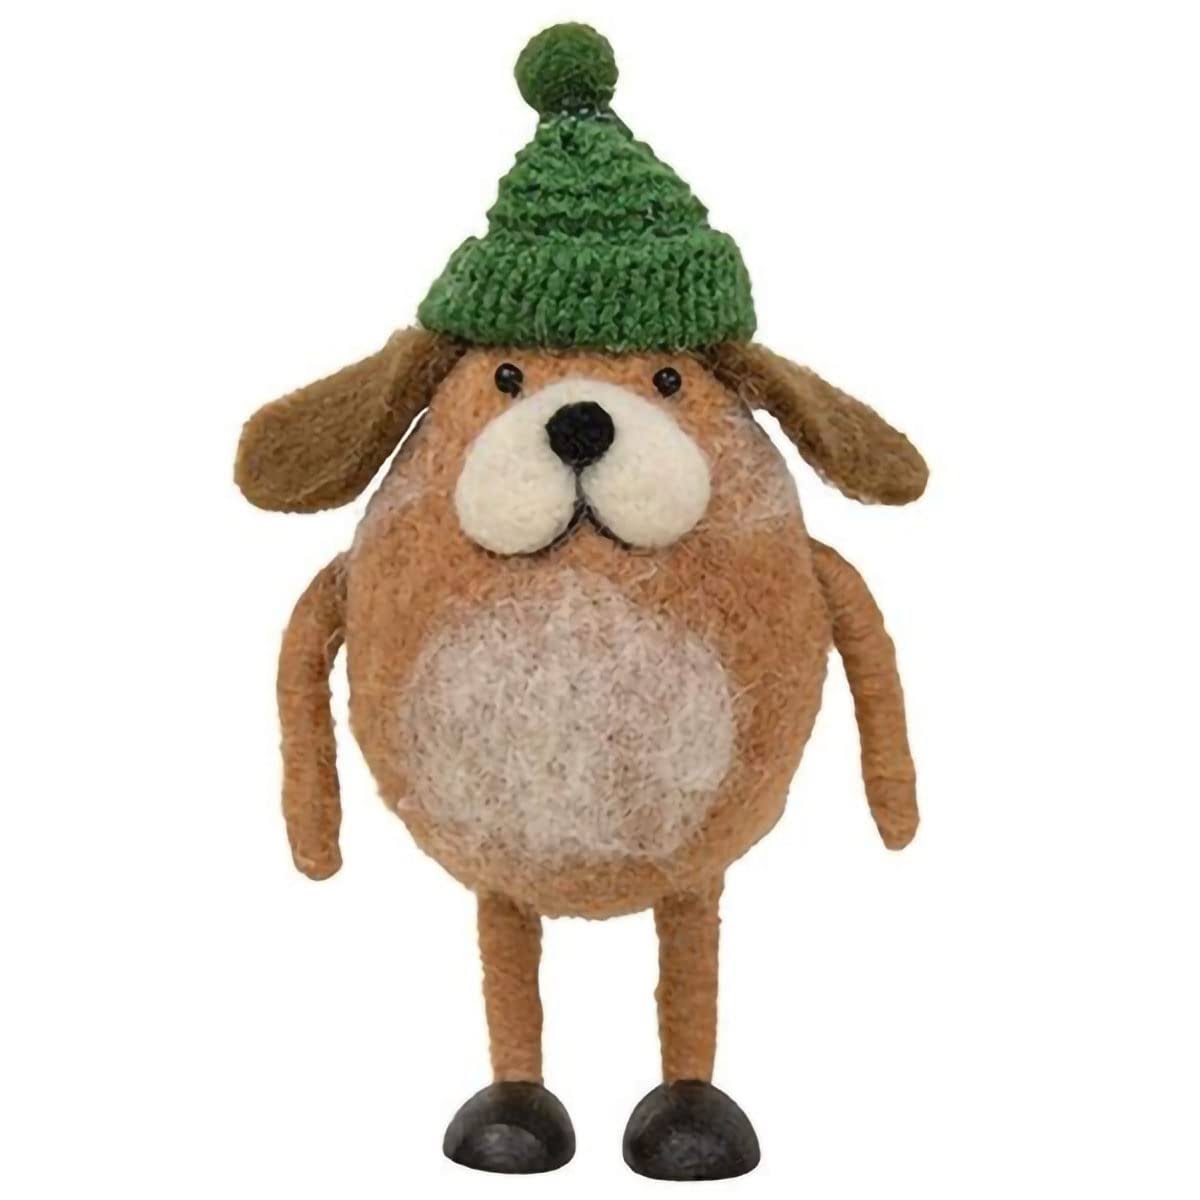 Felted Dog w/Green Hat Ornament GQHT3005 by CWI Gifts